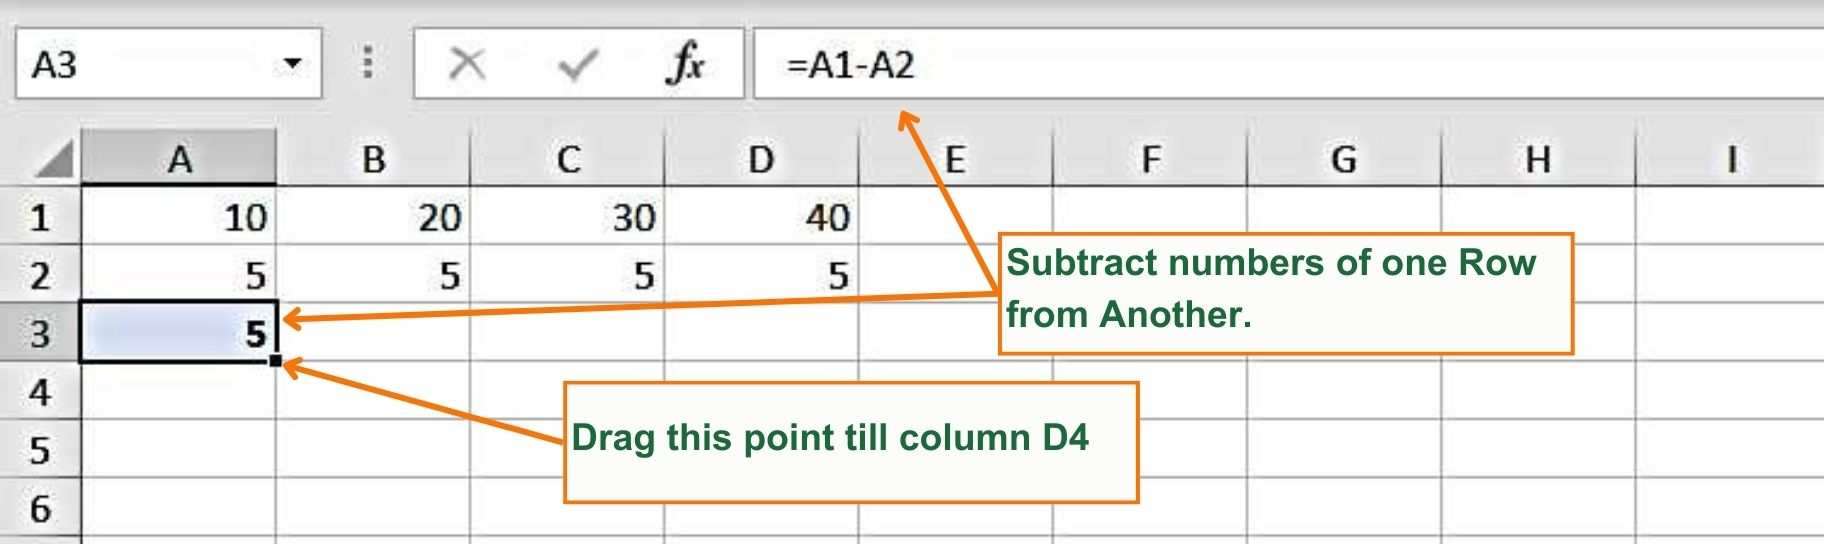 How to subtract numbers from one row to another - Excel Hippo